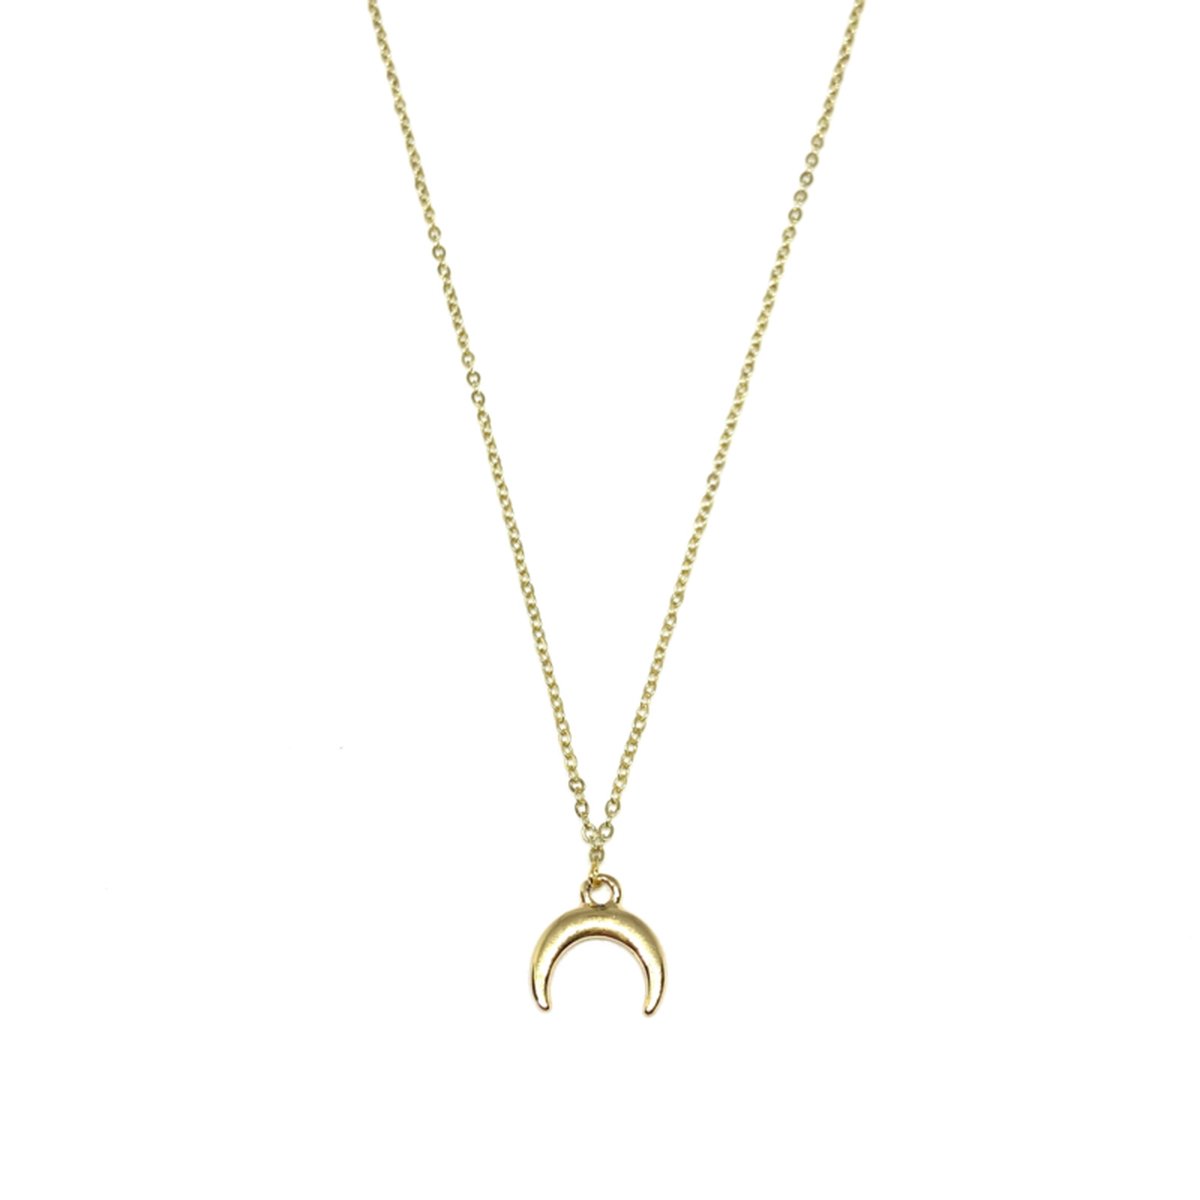 Crescent moon necklace - gold